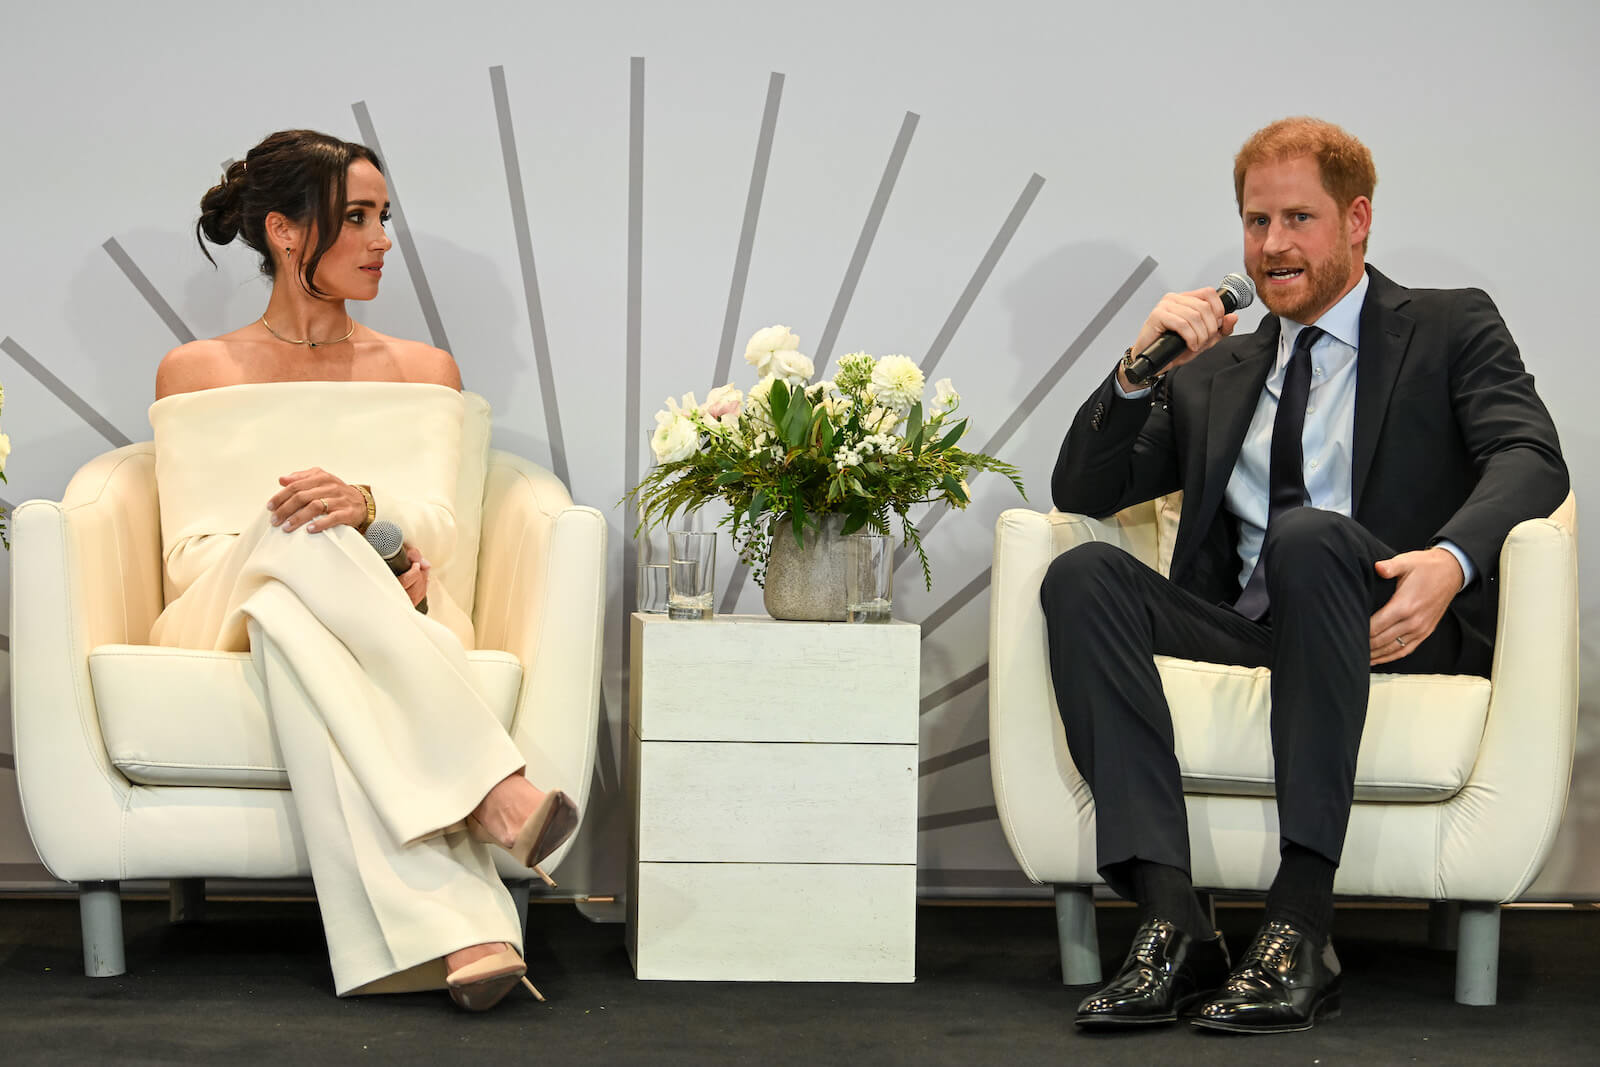 Meghan, Duchess of Sussex, and Prince Harry, Duke of Sussex, speak onstage at The Archewell Foundation Parents’ Summit: Mental Wellness in the Digital Age during Project Healthy Minds' World Mental Health Day Festival 2023. Meghan is sitting and wearing a cream-colored dress, and Harry is wearing a suit.